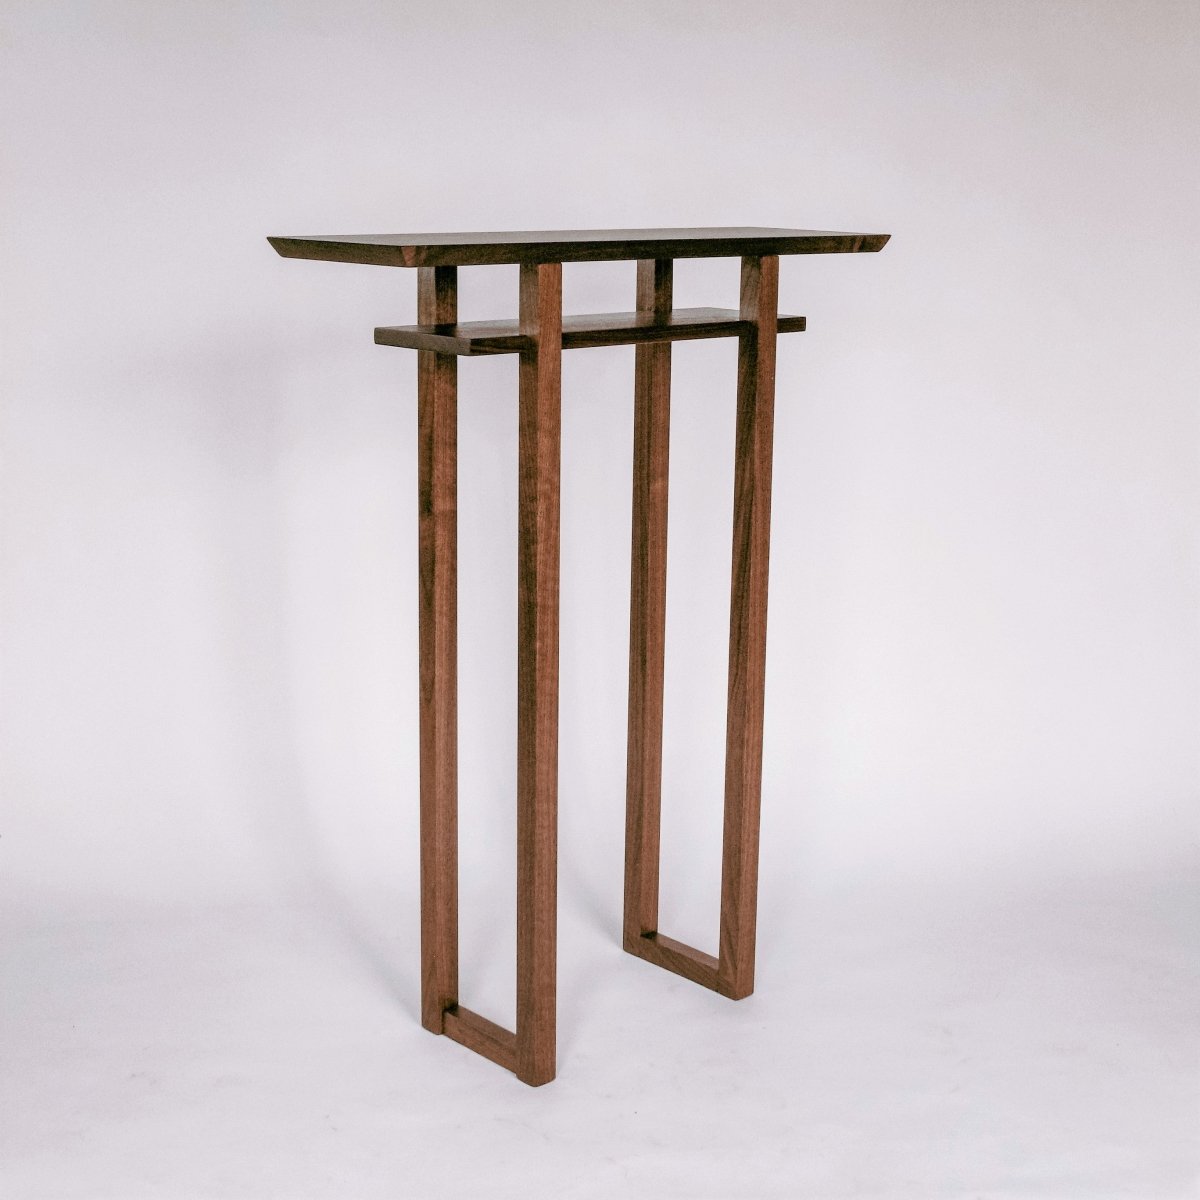 A tall narrow console table for entryways by Mokuzai Furniture.